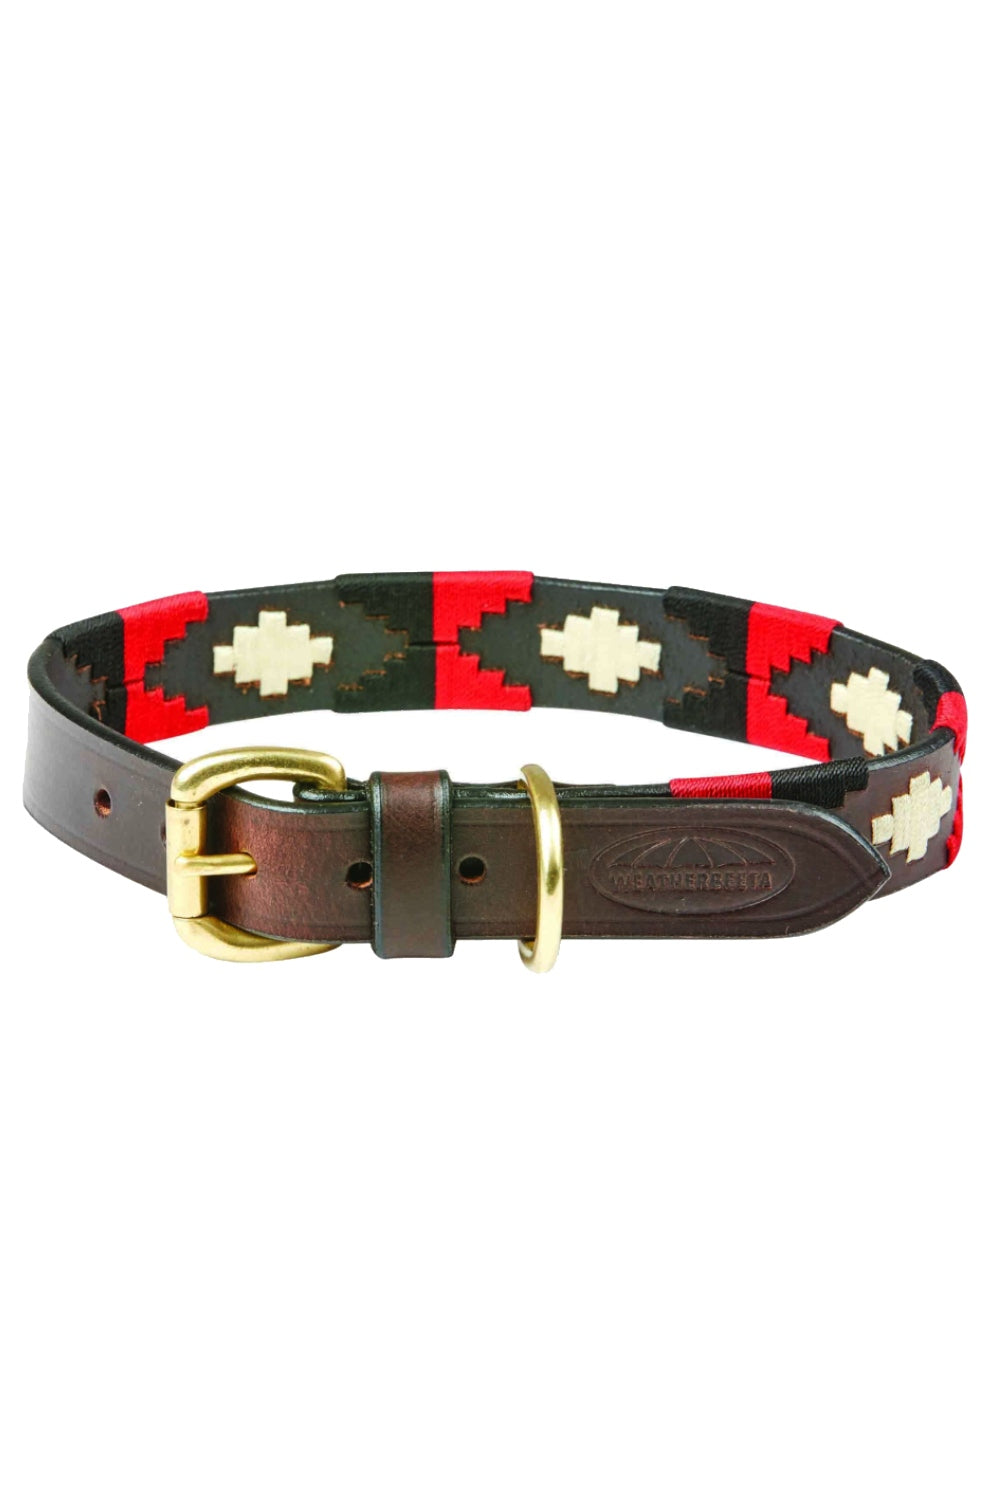 WeatherBeeta Polo Leather Dog Collar in Cowdray Brown/Black/Red/White 